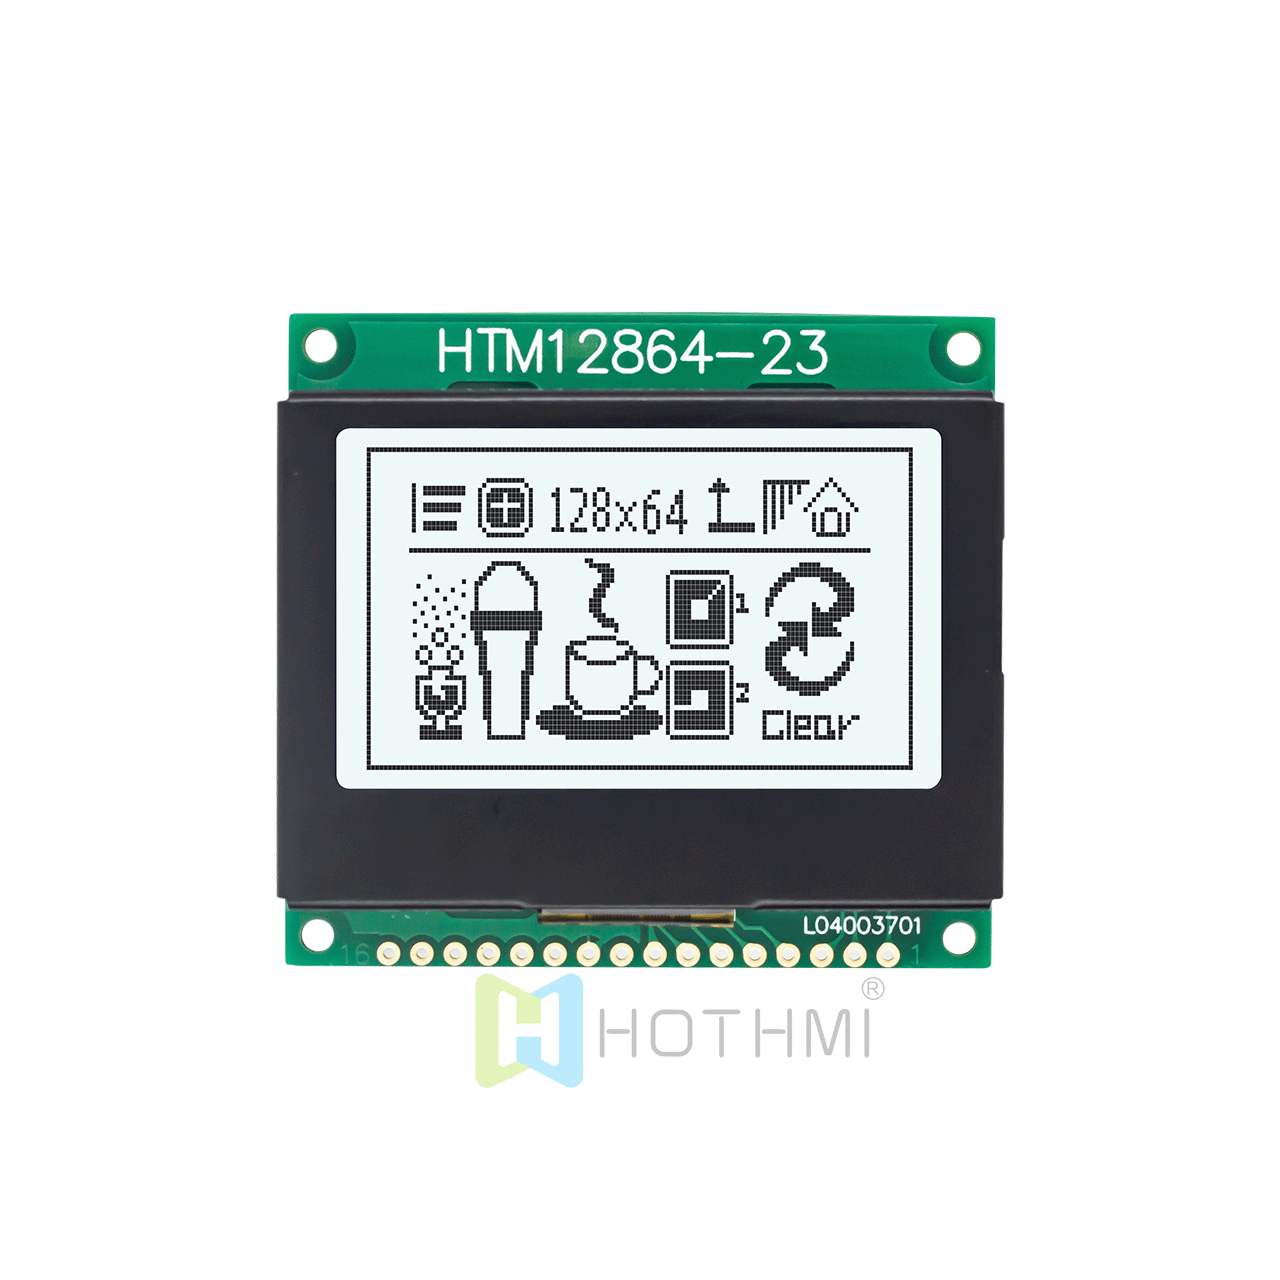 2.0-inch 12864 graphic dot matrix module/128x64 graphic LCD module/ST7565 control chip/5.0 gray text on white background